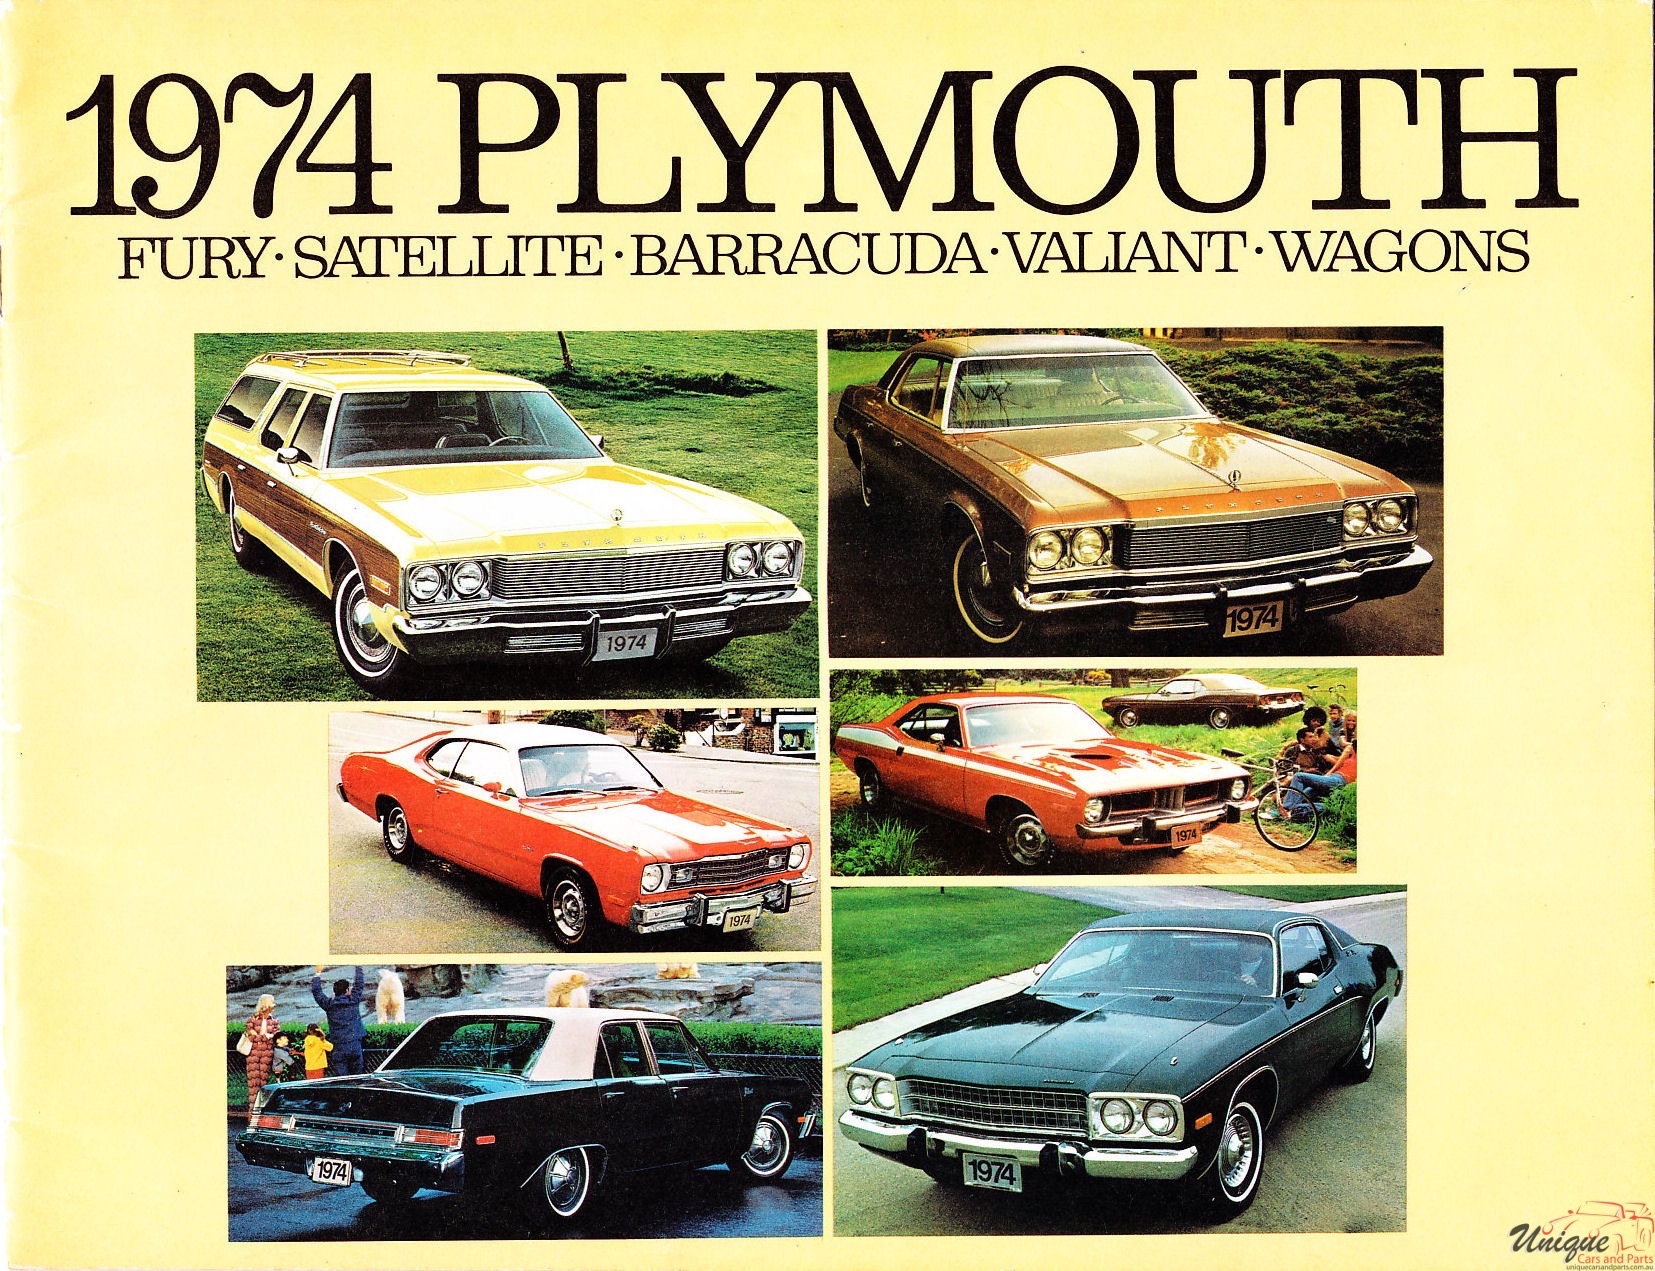 1974 Plymouth Full-Line Canadian Brochure